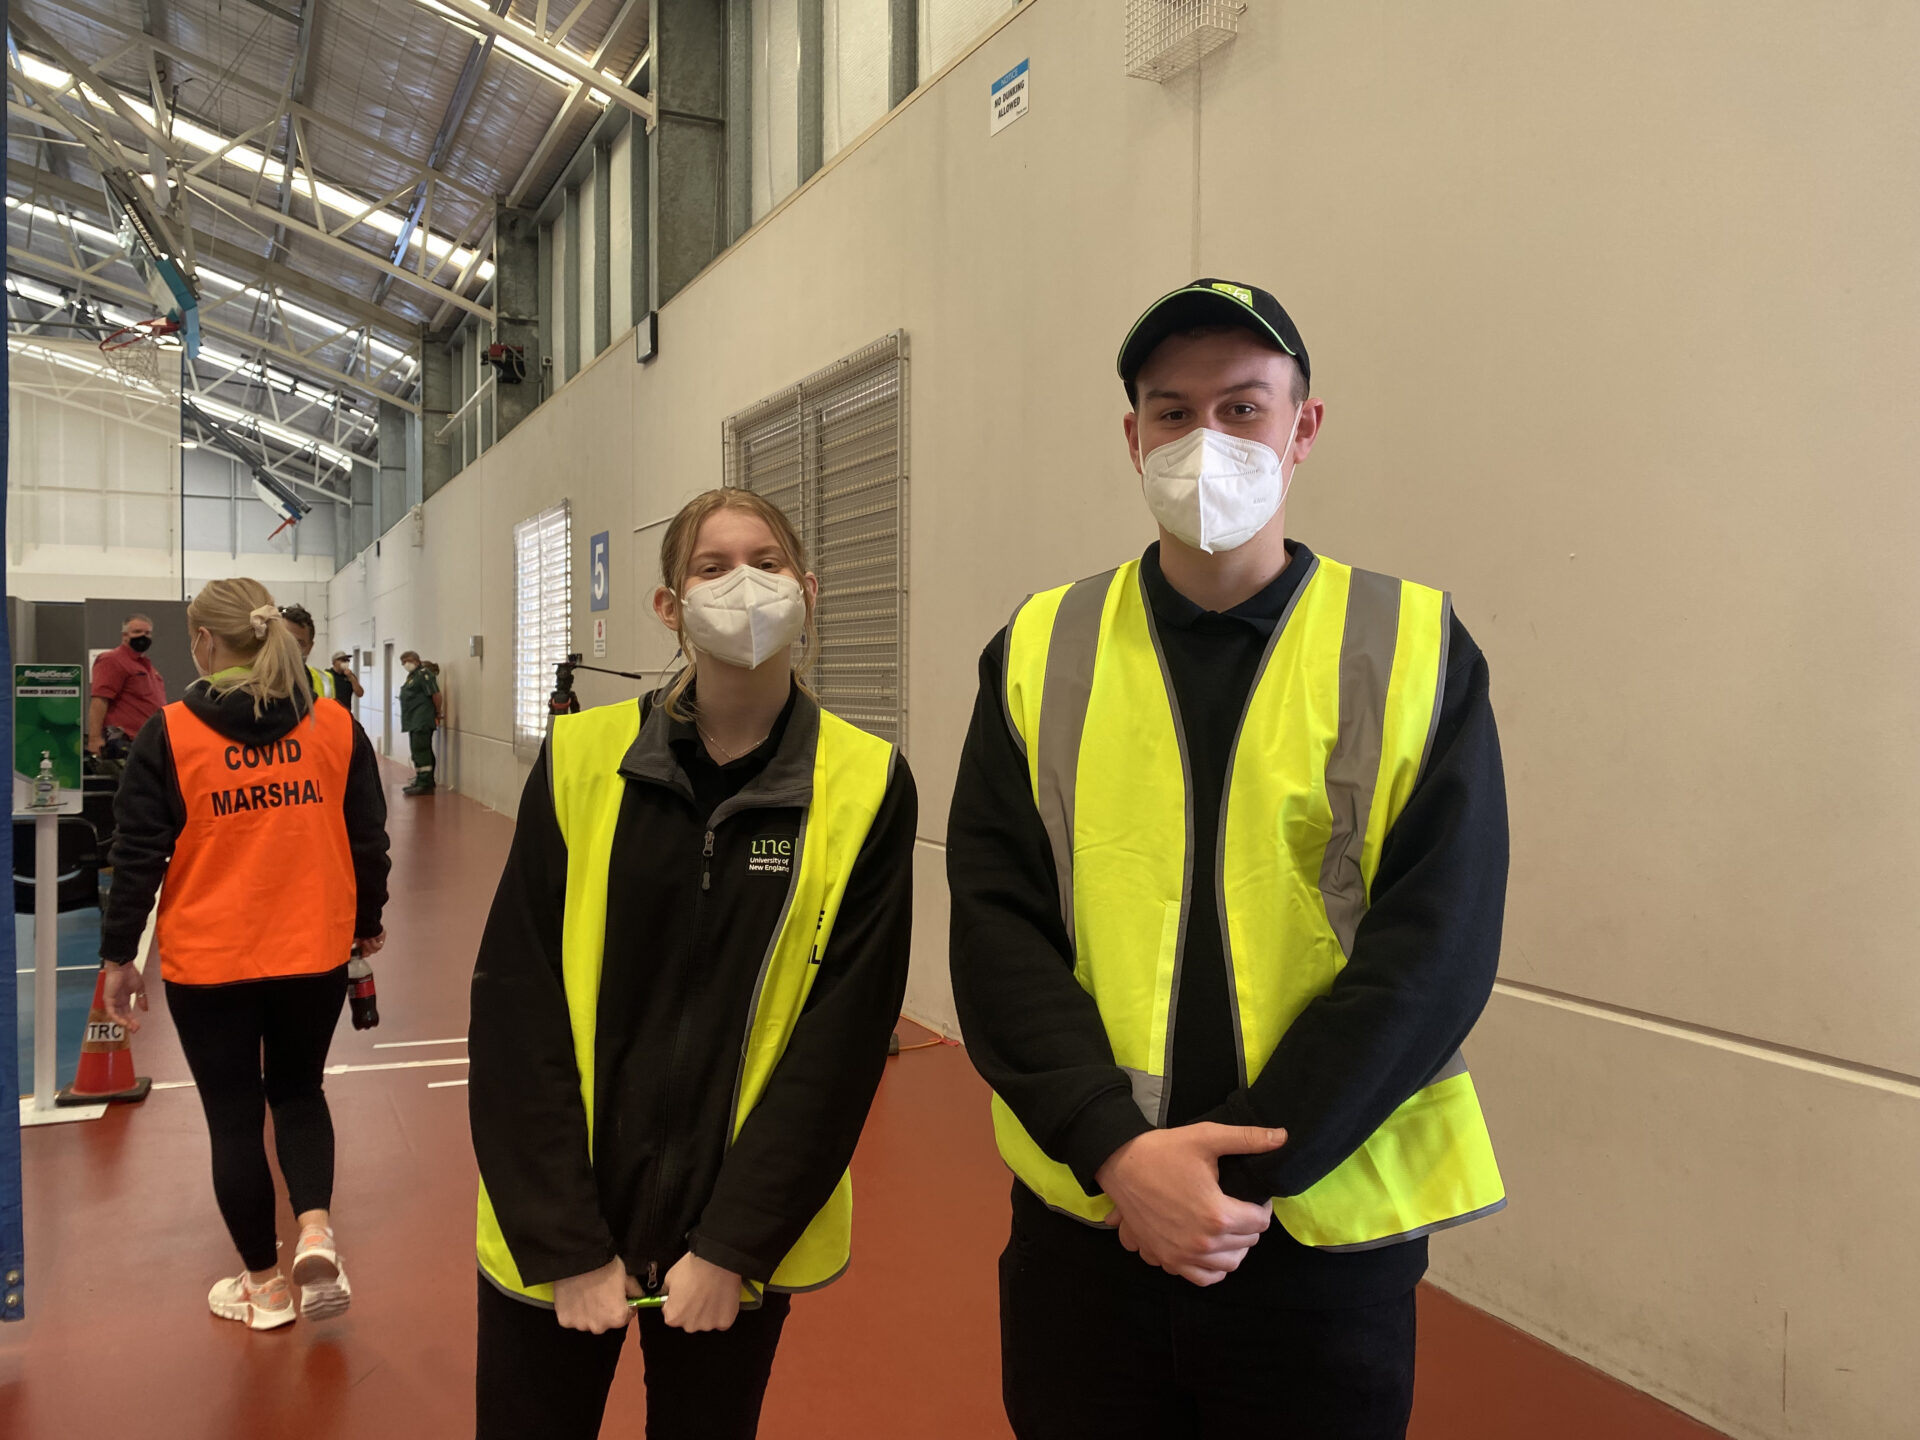 UNE Life members stand in high-vis vests as covid marshals at COVID Clinic event